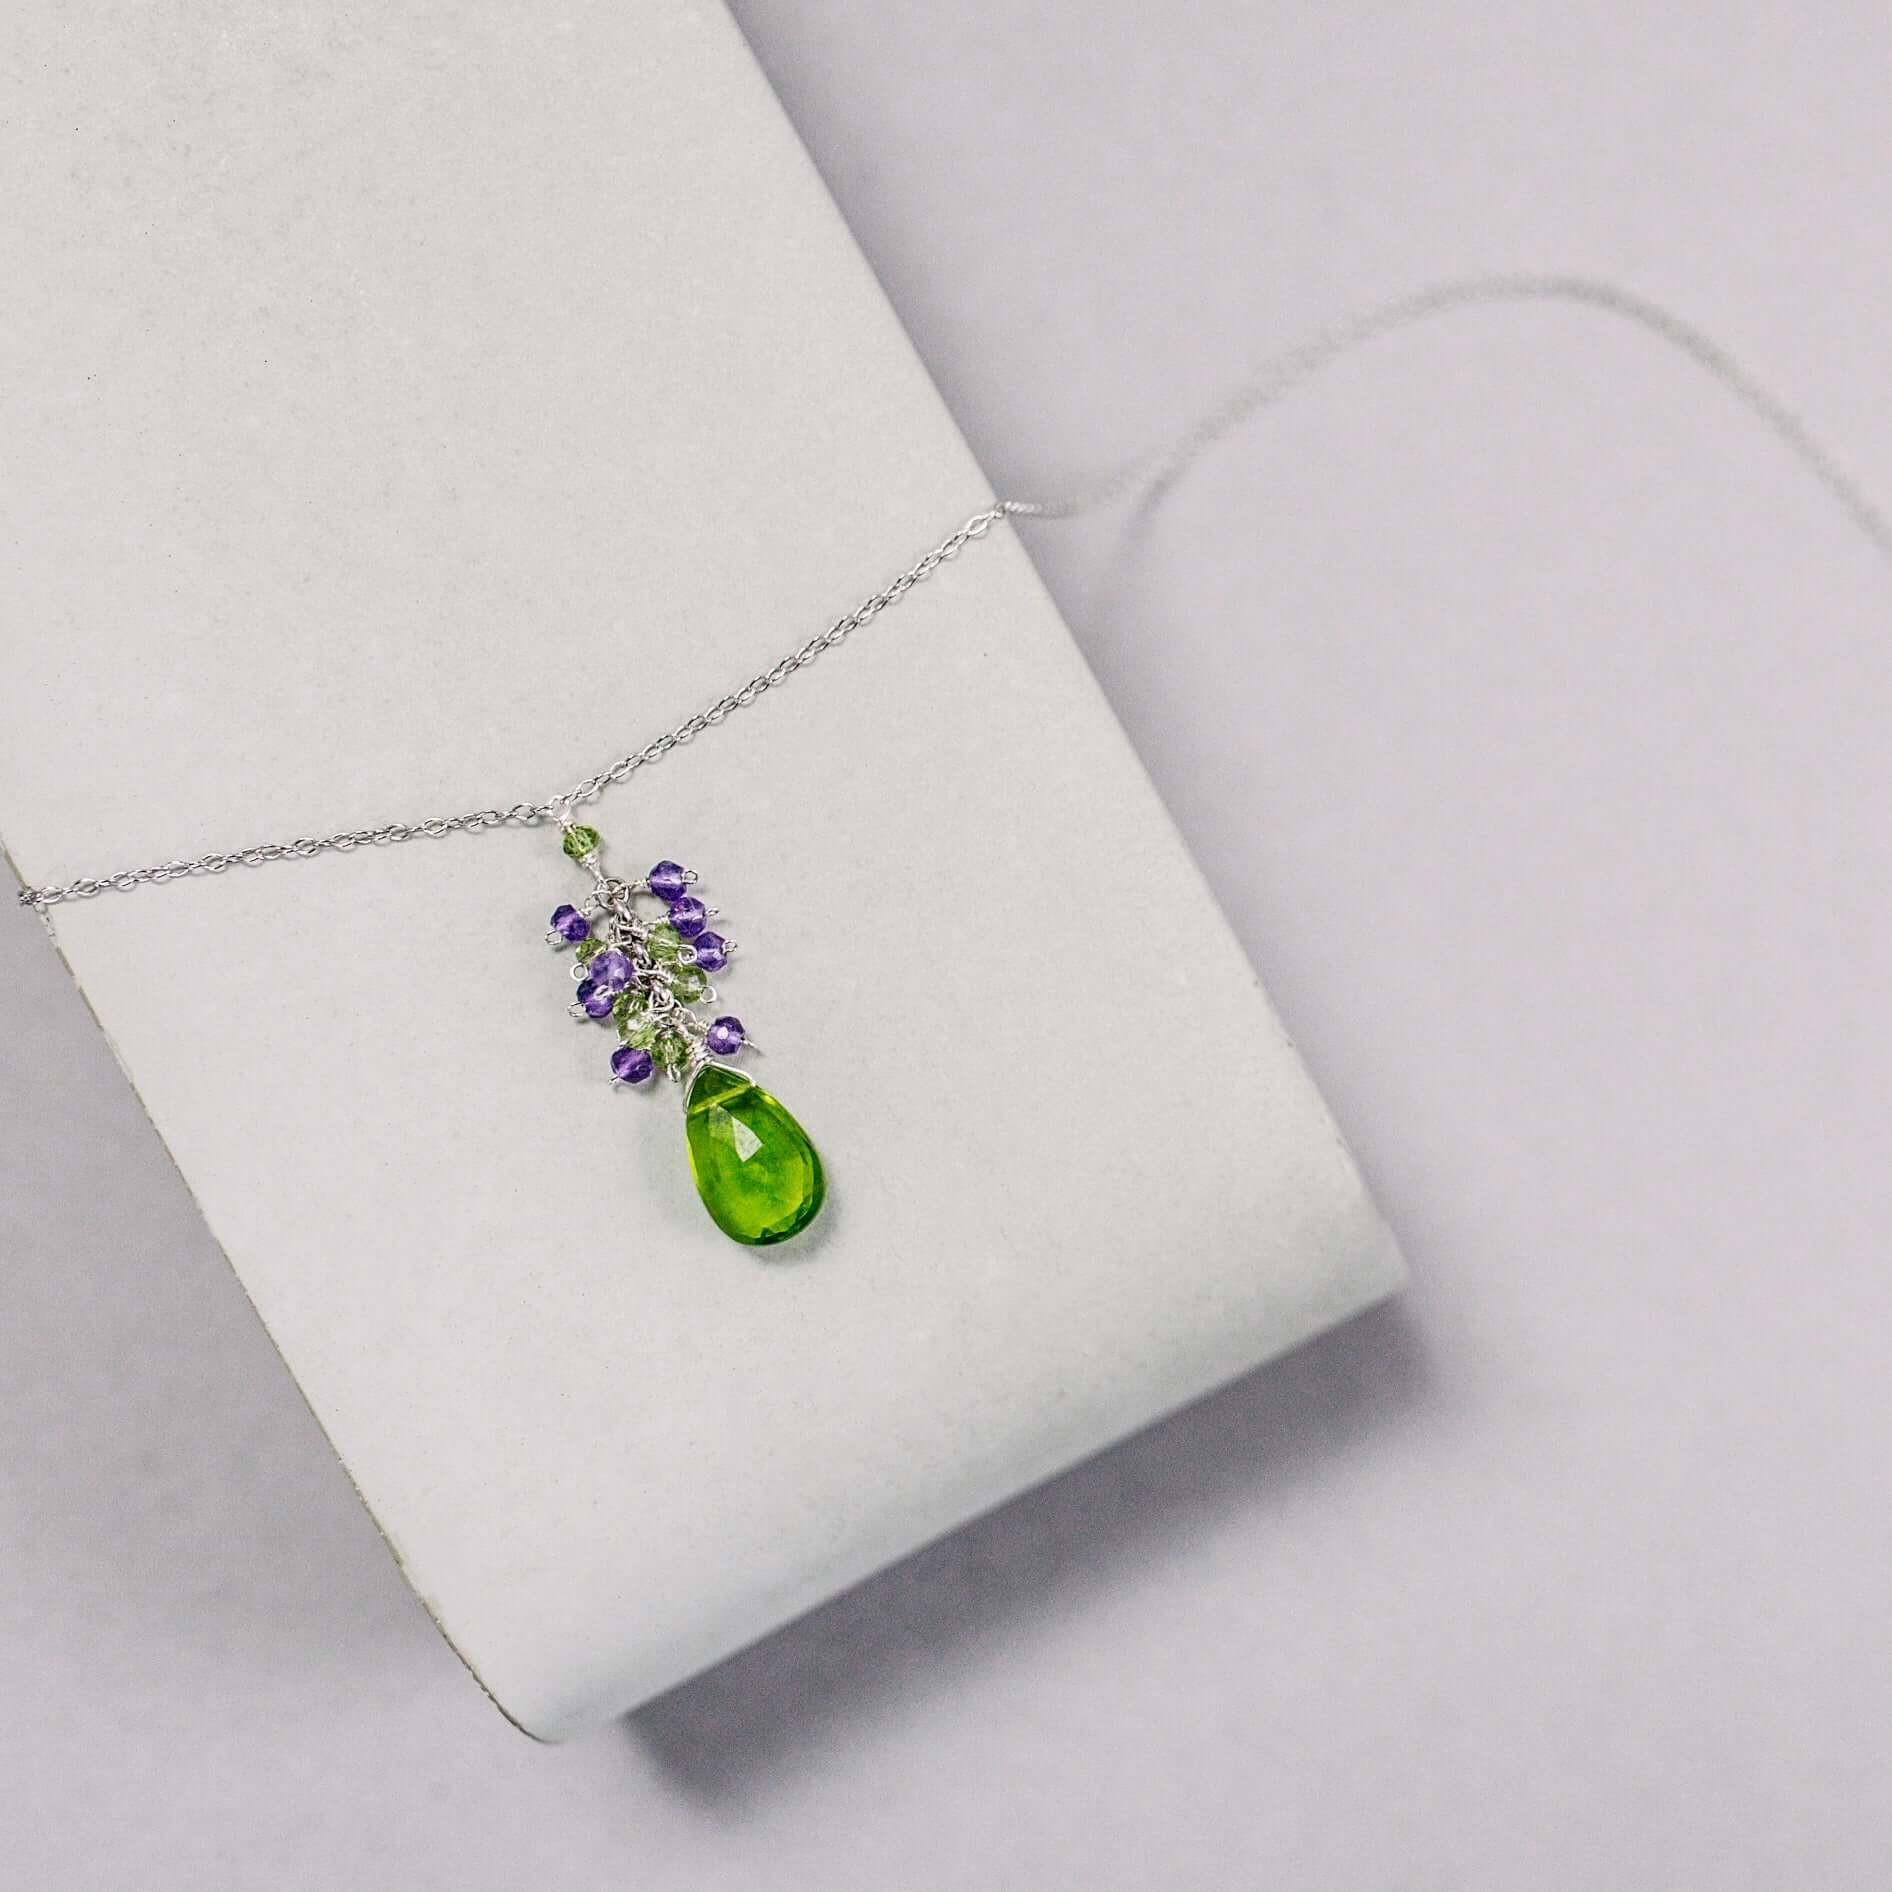 Rhodium plated  Necklace with a stunning Peridot  Quartz Pendant paired with Amethyst gemstones accent 